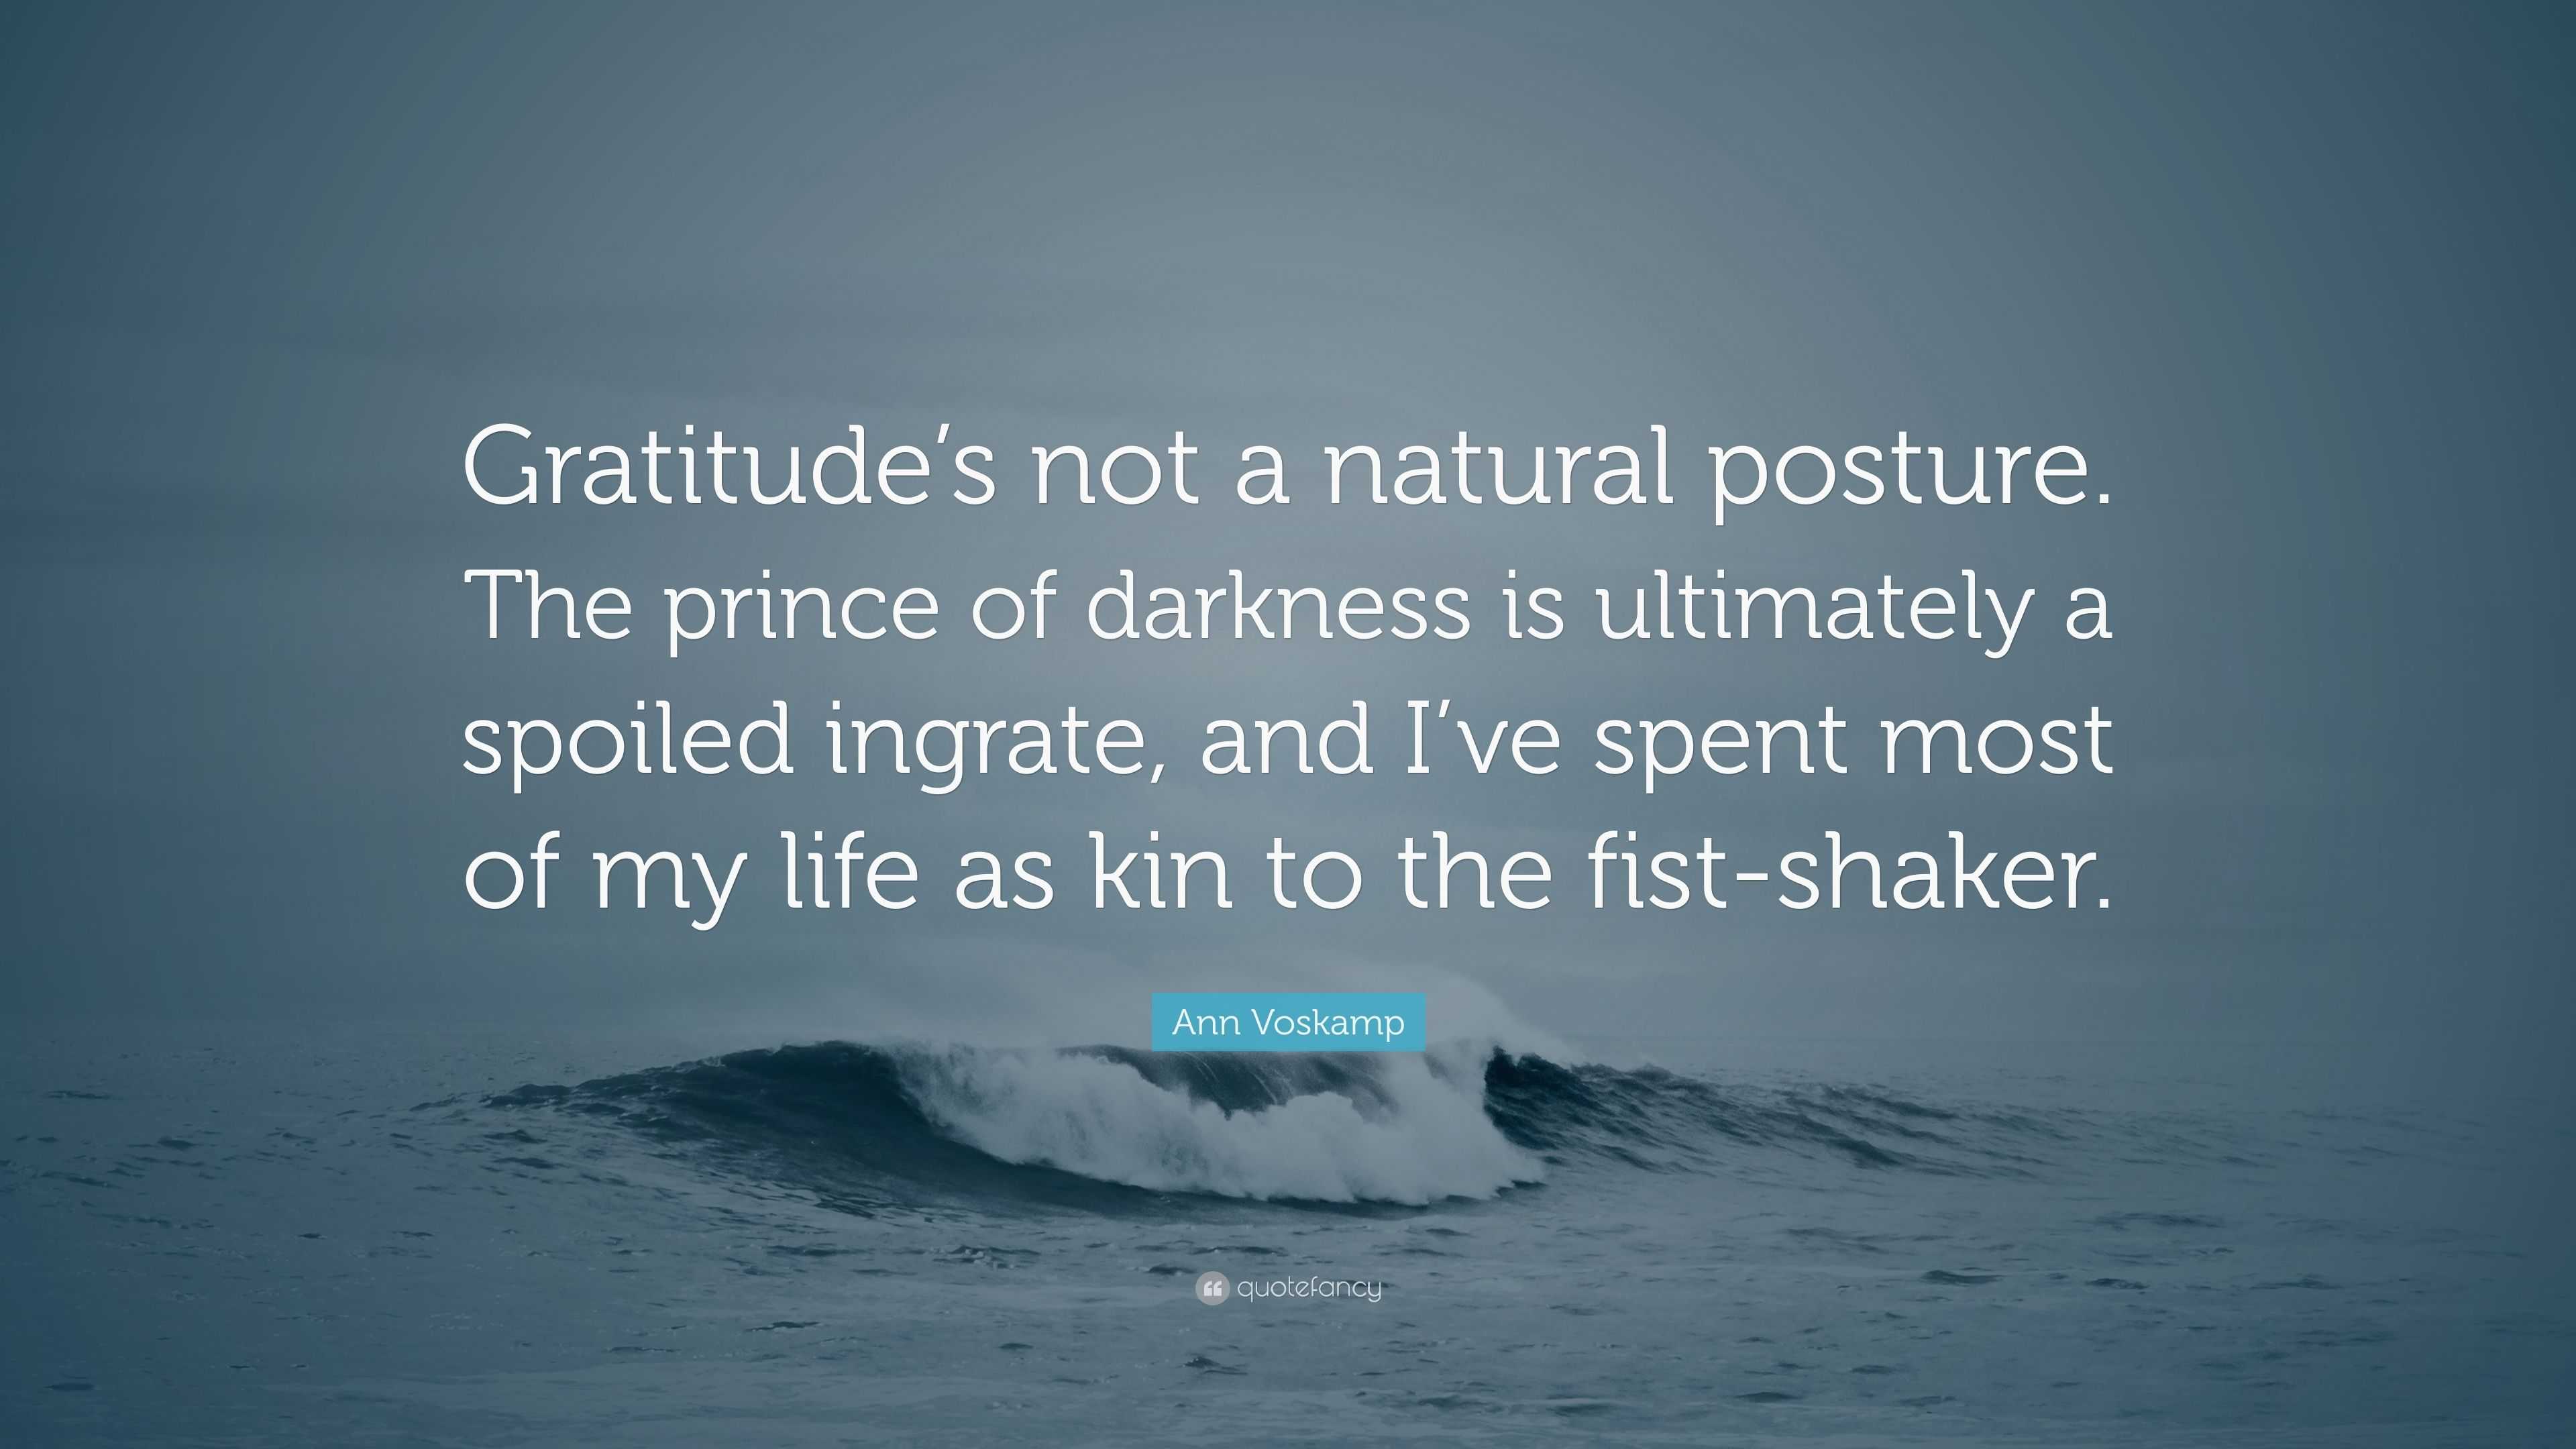 https://quotefancy.com/media/wallpaper/3840x2160/4849030-Ann-Voskamp-Quote-Gratitude-s-not-a-natural-posture-The-prince-of.jpg